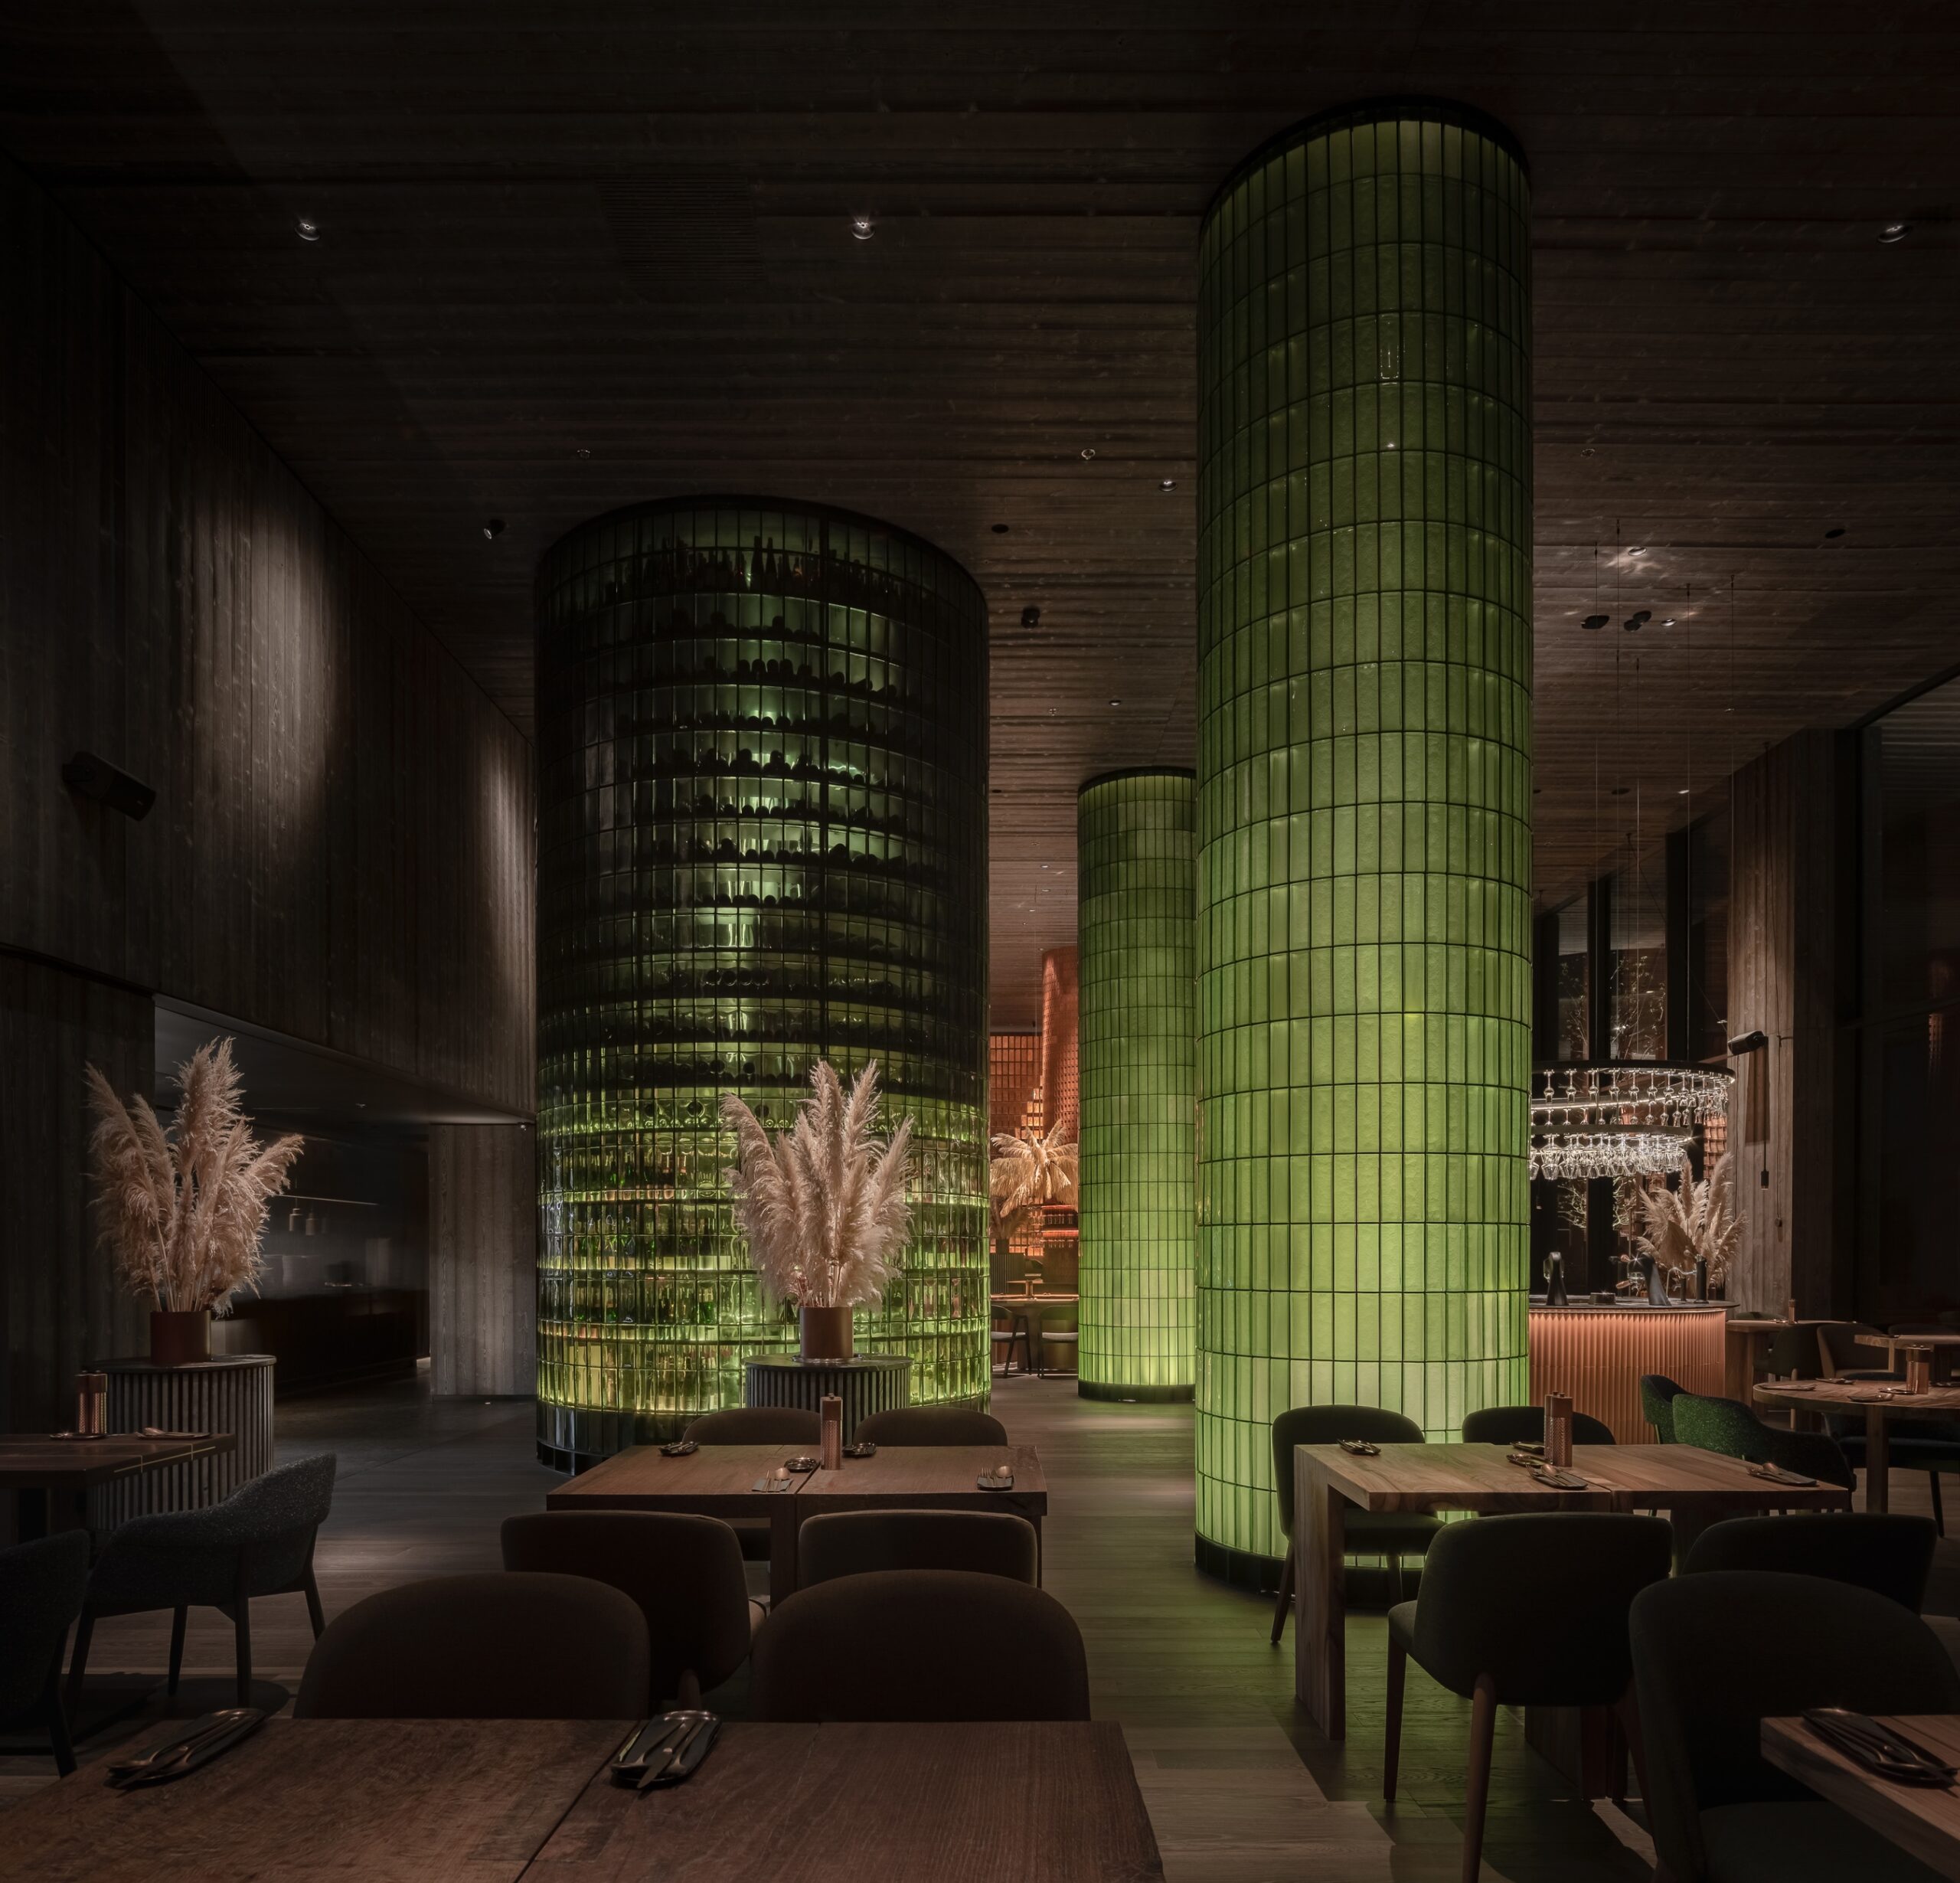 Terra restaurant by Yod Group